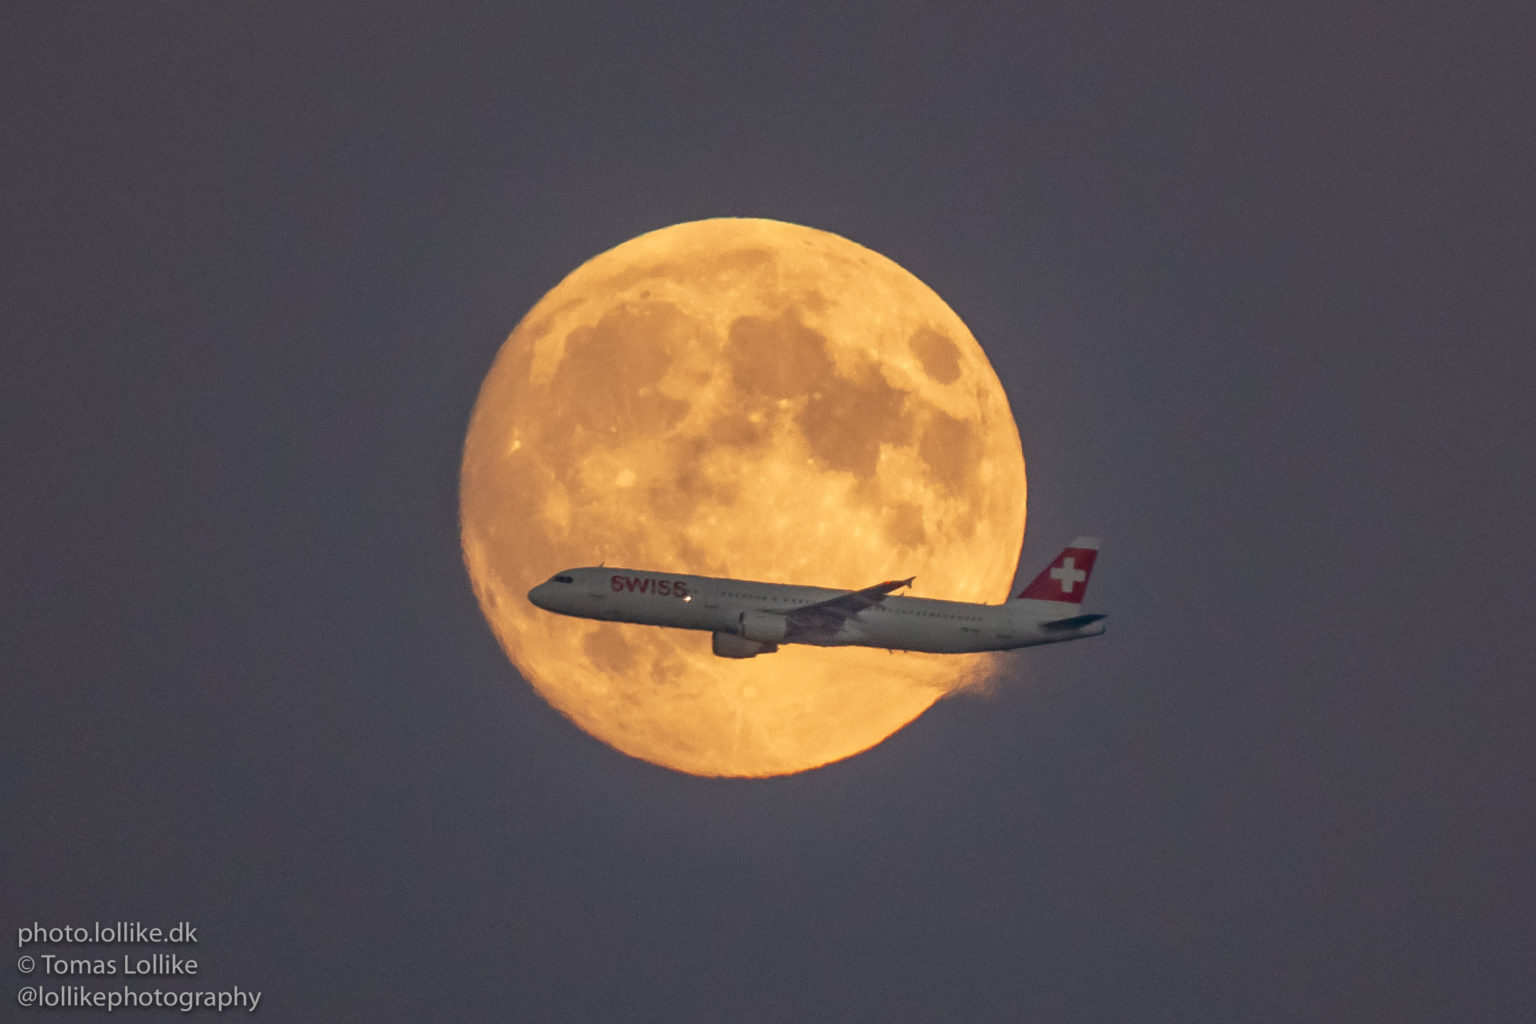 SWISS (HB-IOL) passing the moon shortly after take-off from Copenhagen to Zurich in an Airbus A321 on route LX1273